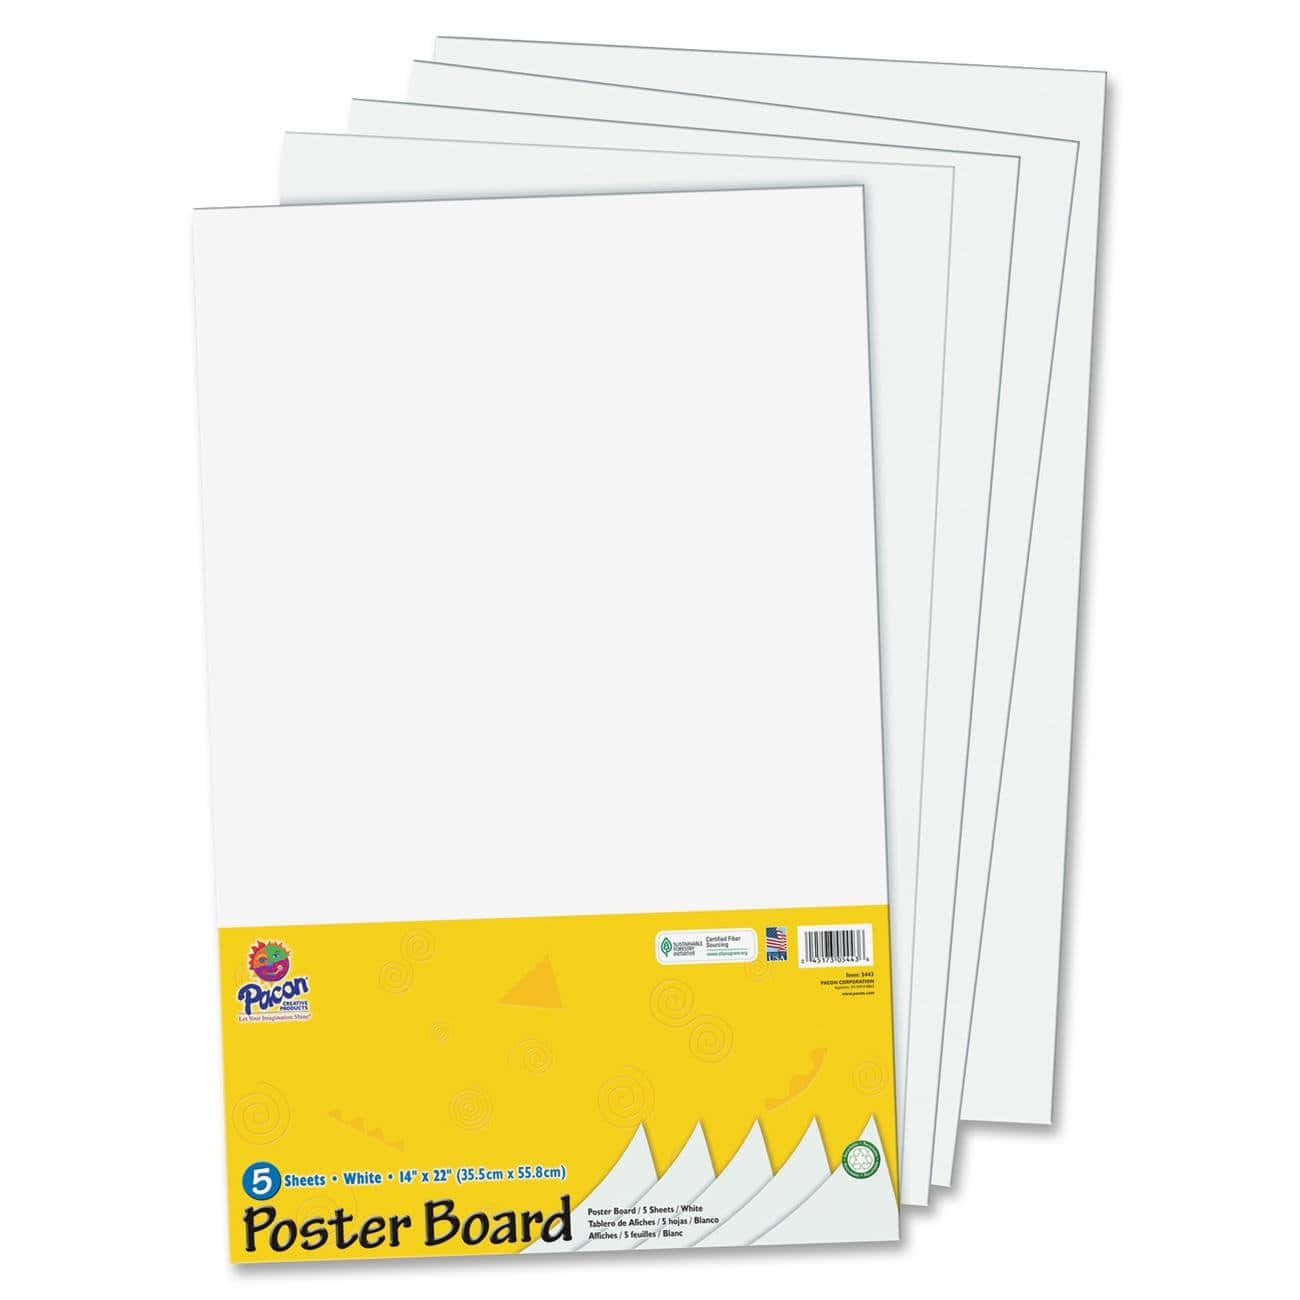 A Pack Of White Poster Board